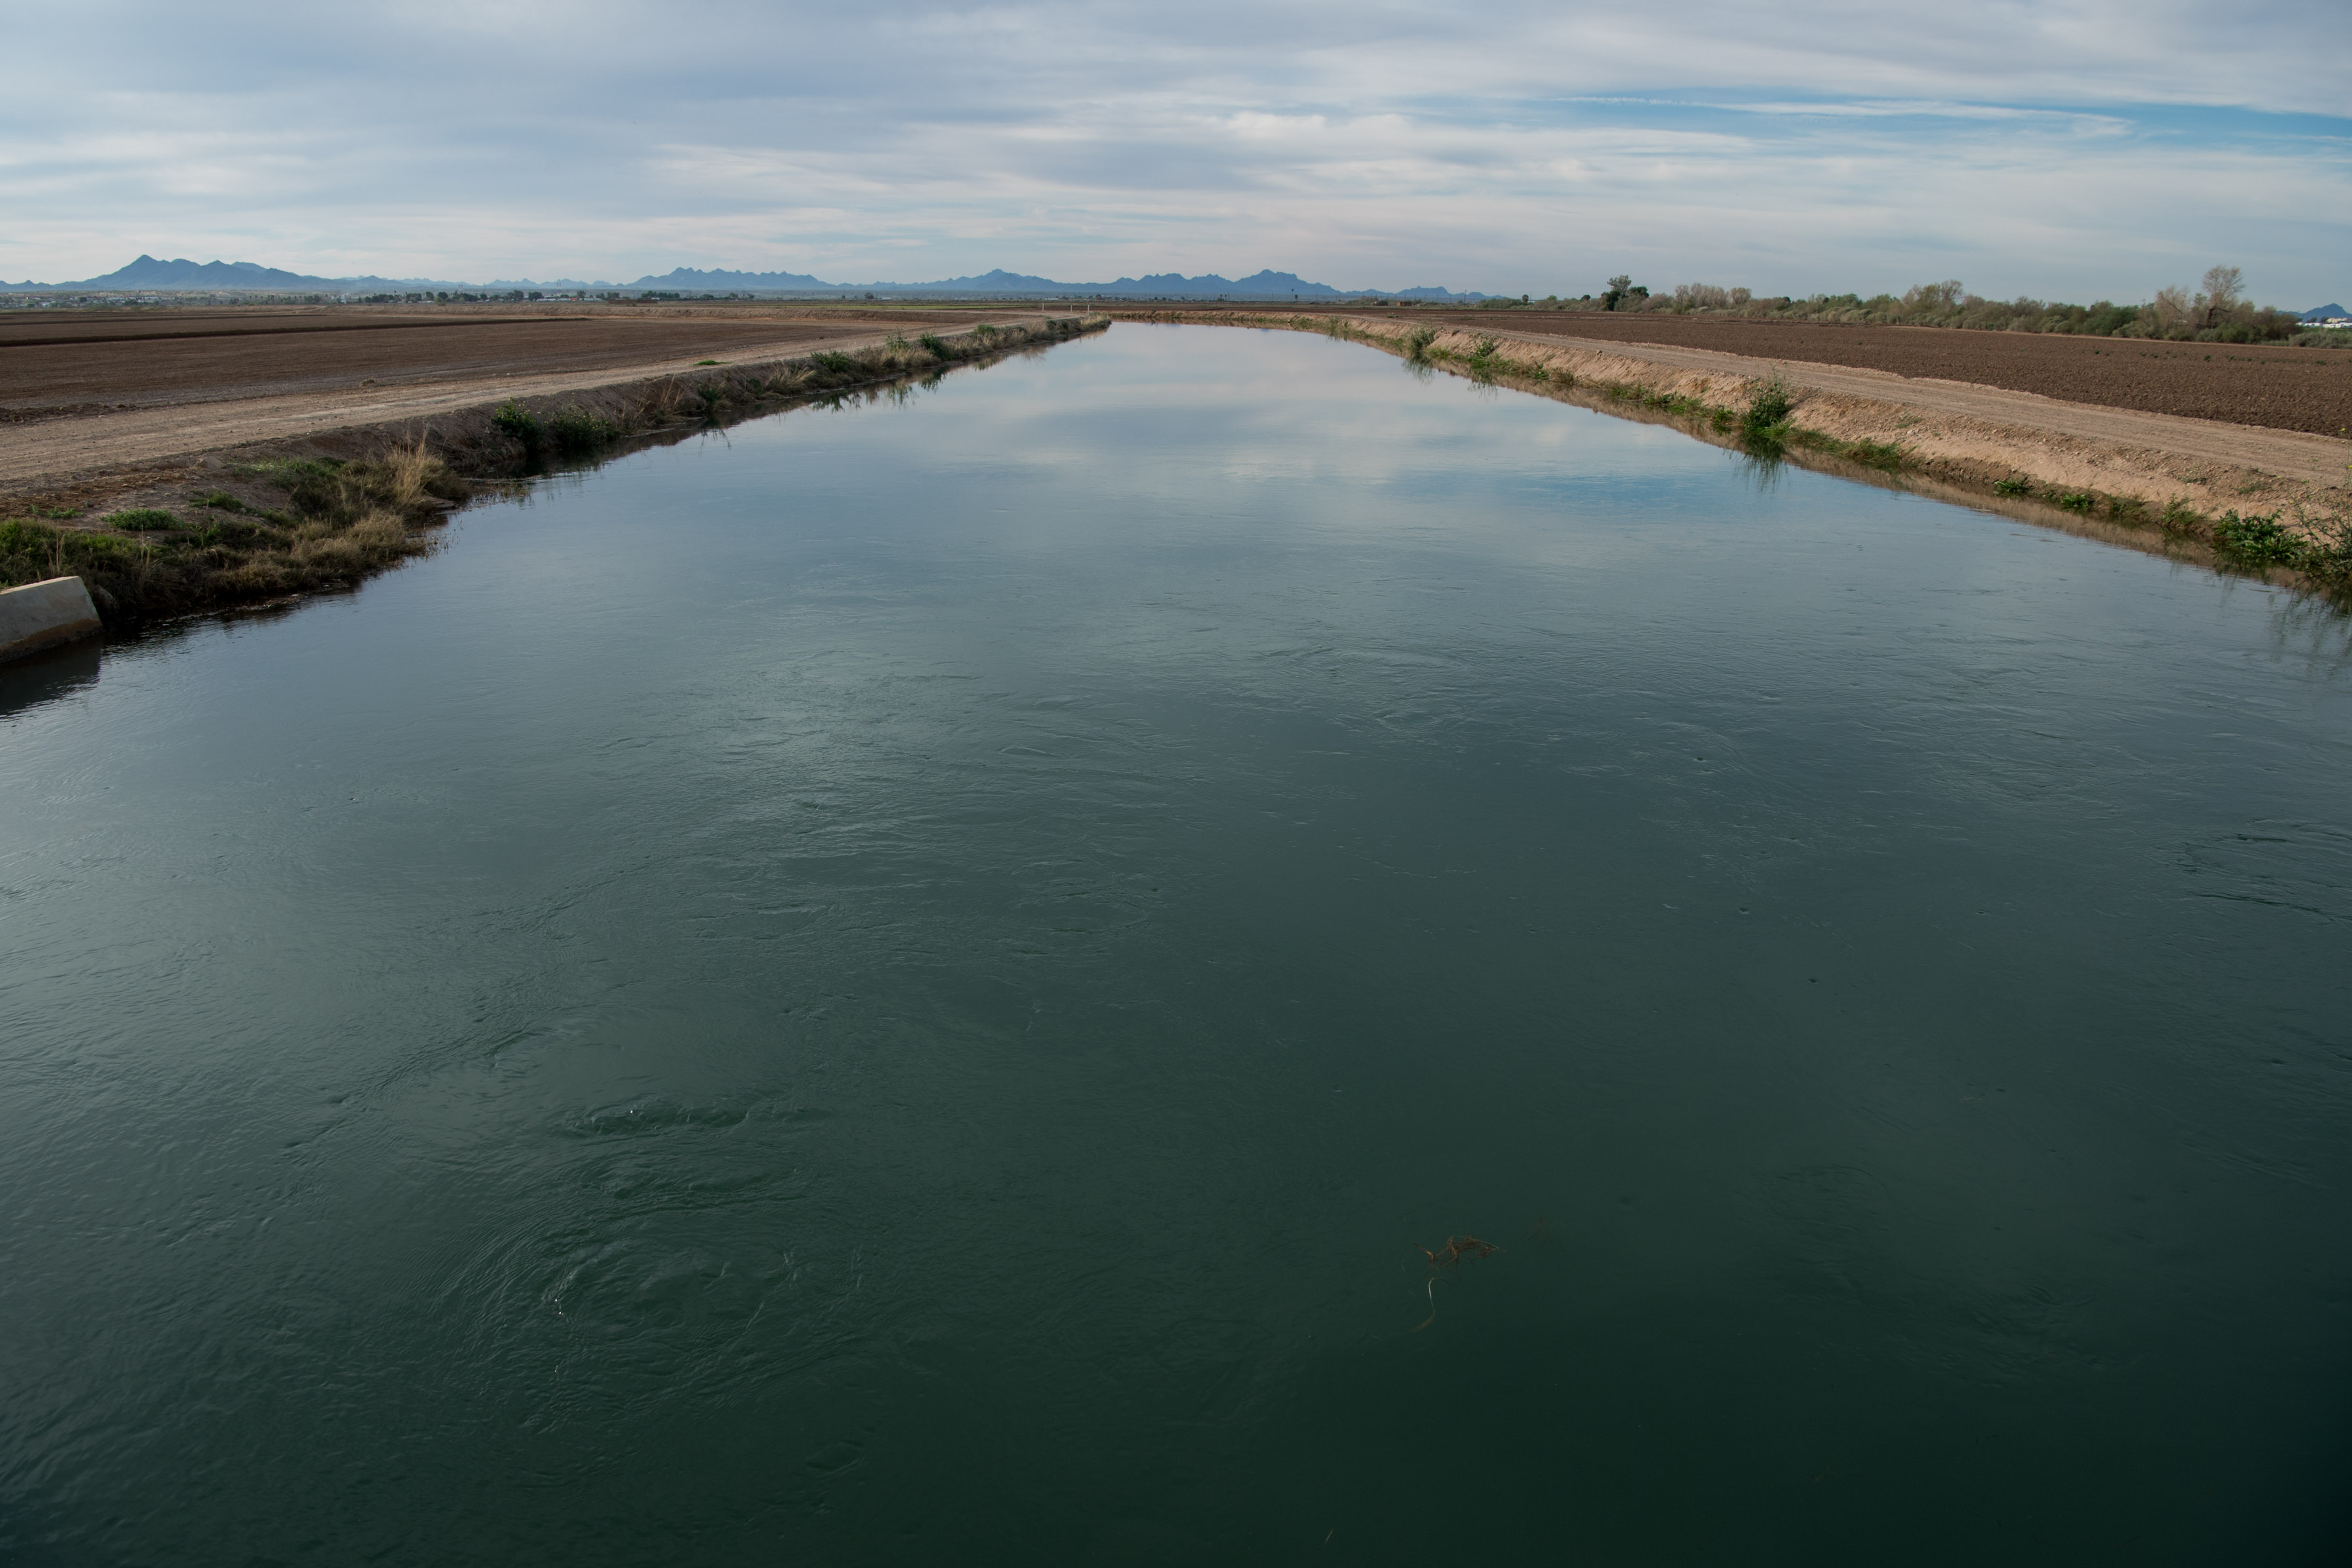 A canal in the Western United States.